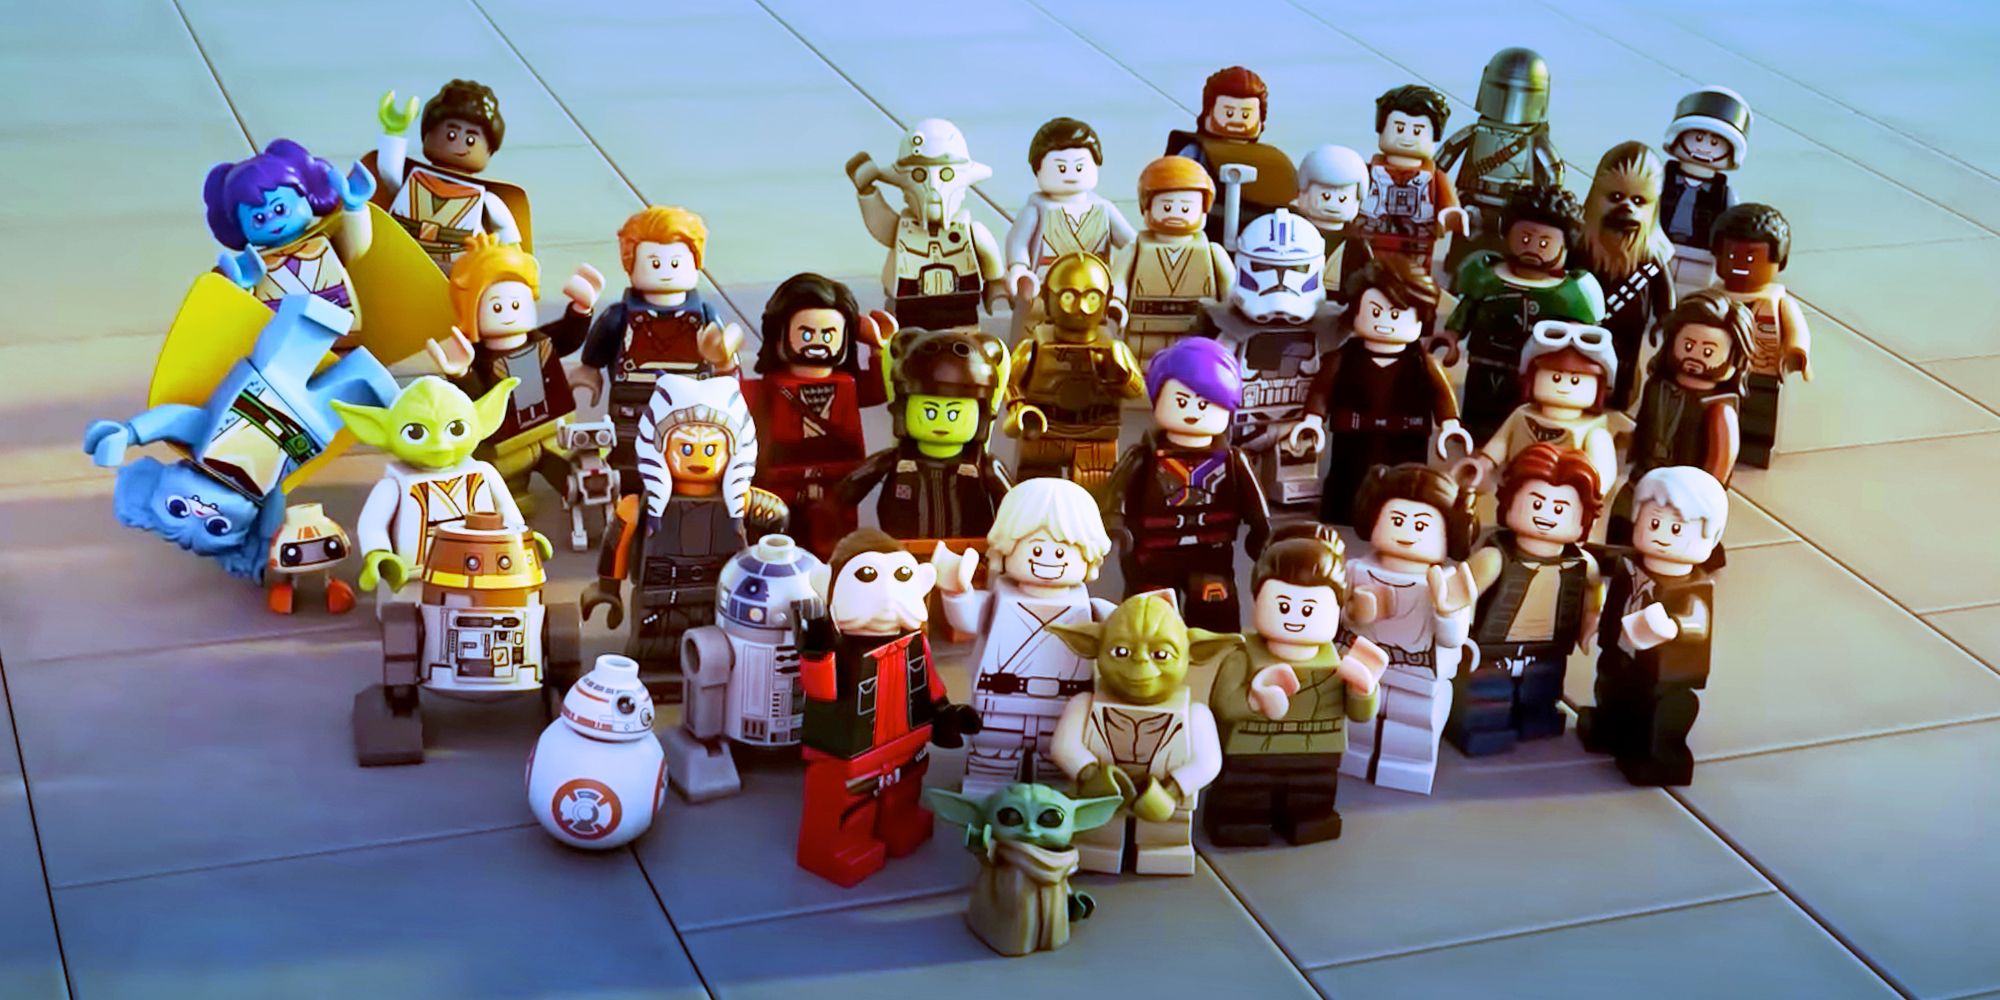 LEGO Star Wars Brings The Franchise’s Most Beloved Characters Together In This 25th Anniversary Video